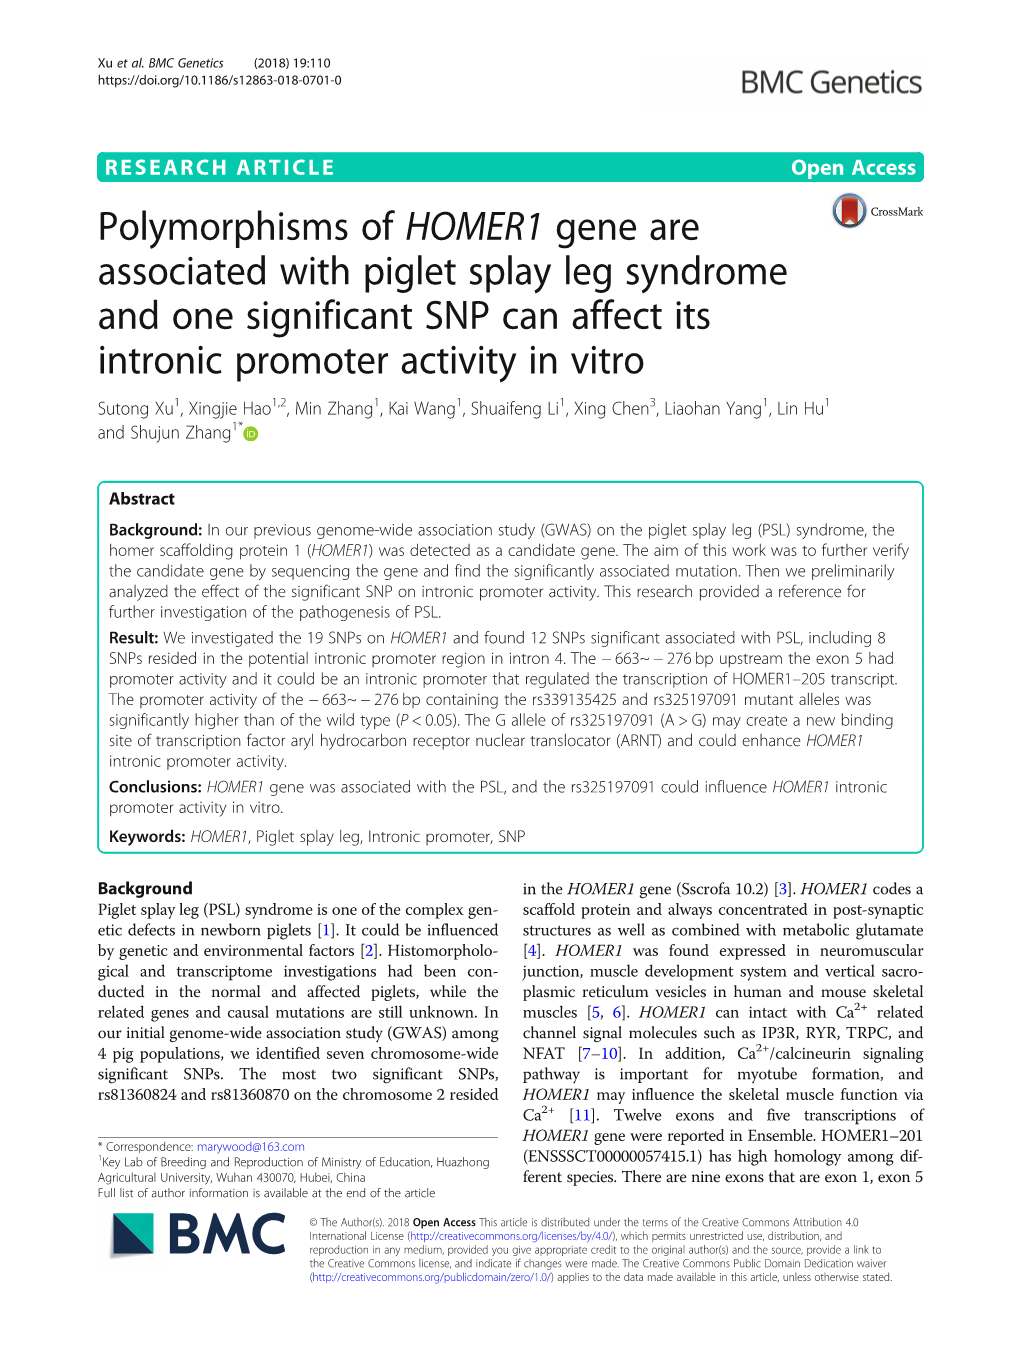 Polymorphisms of HOMER1 Gene Are Associated with Piglet Splay Leg